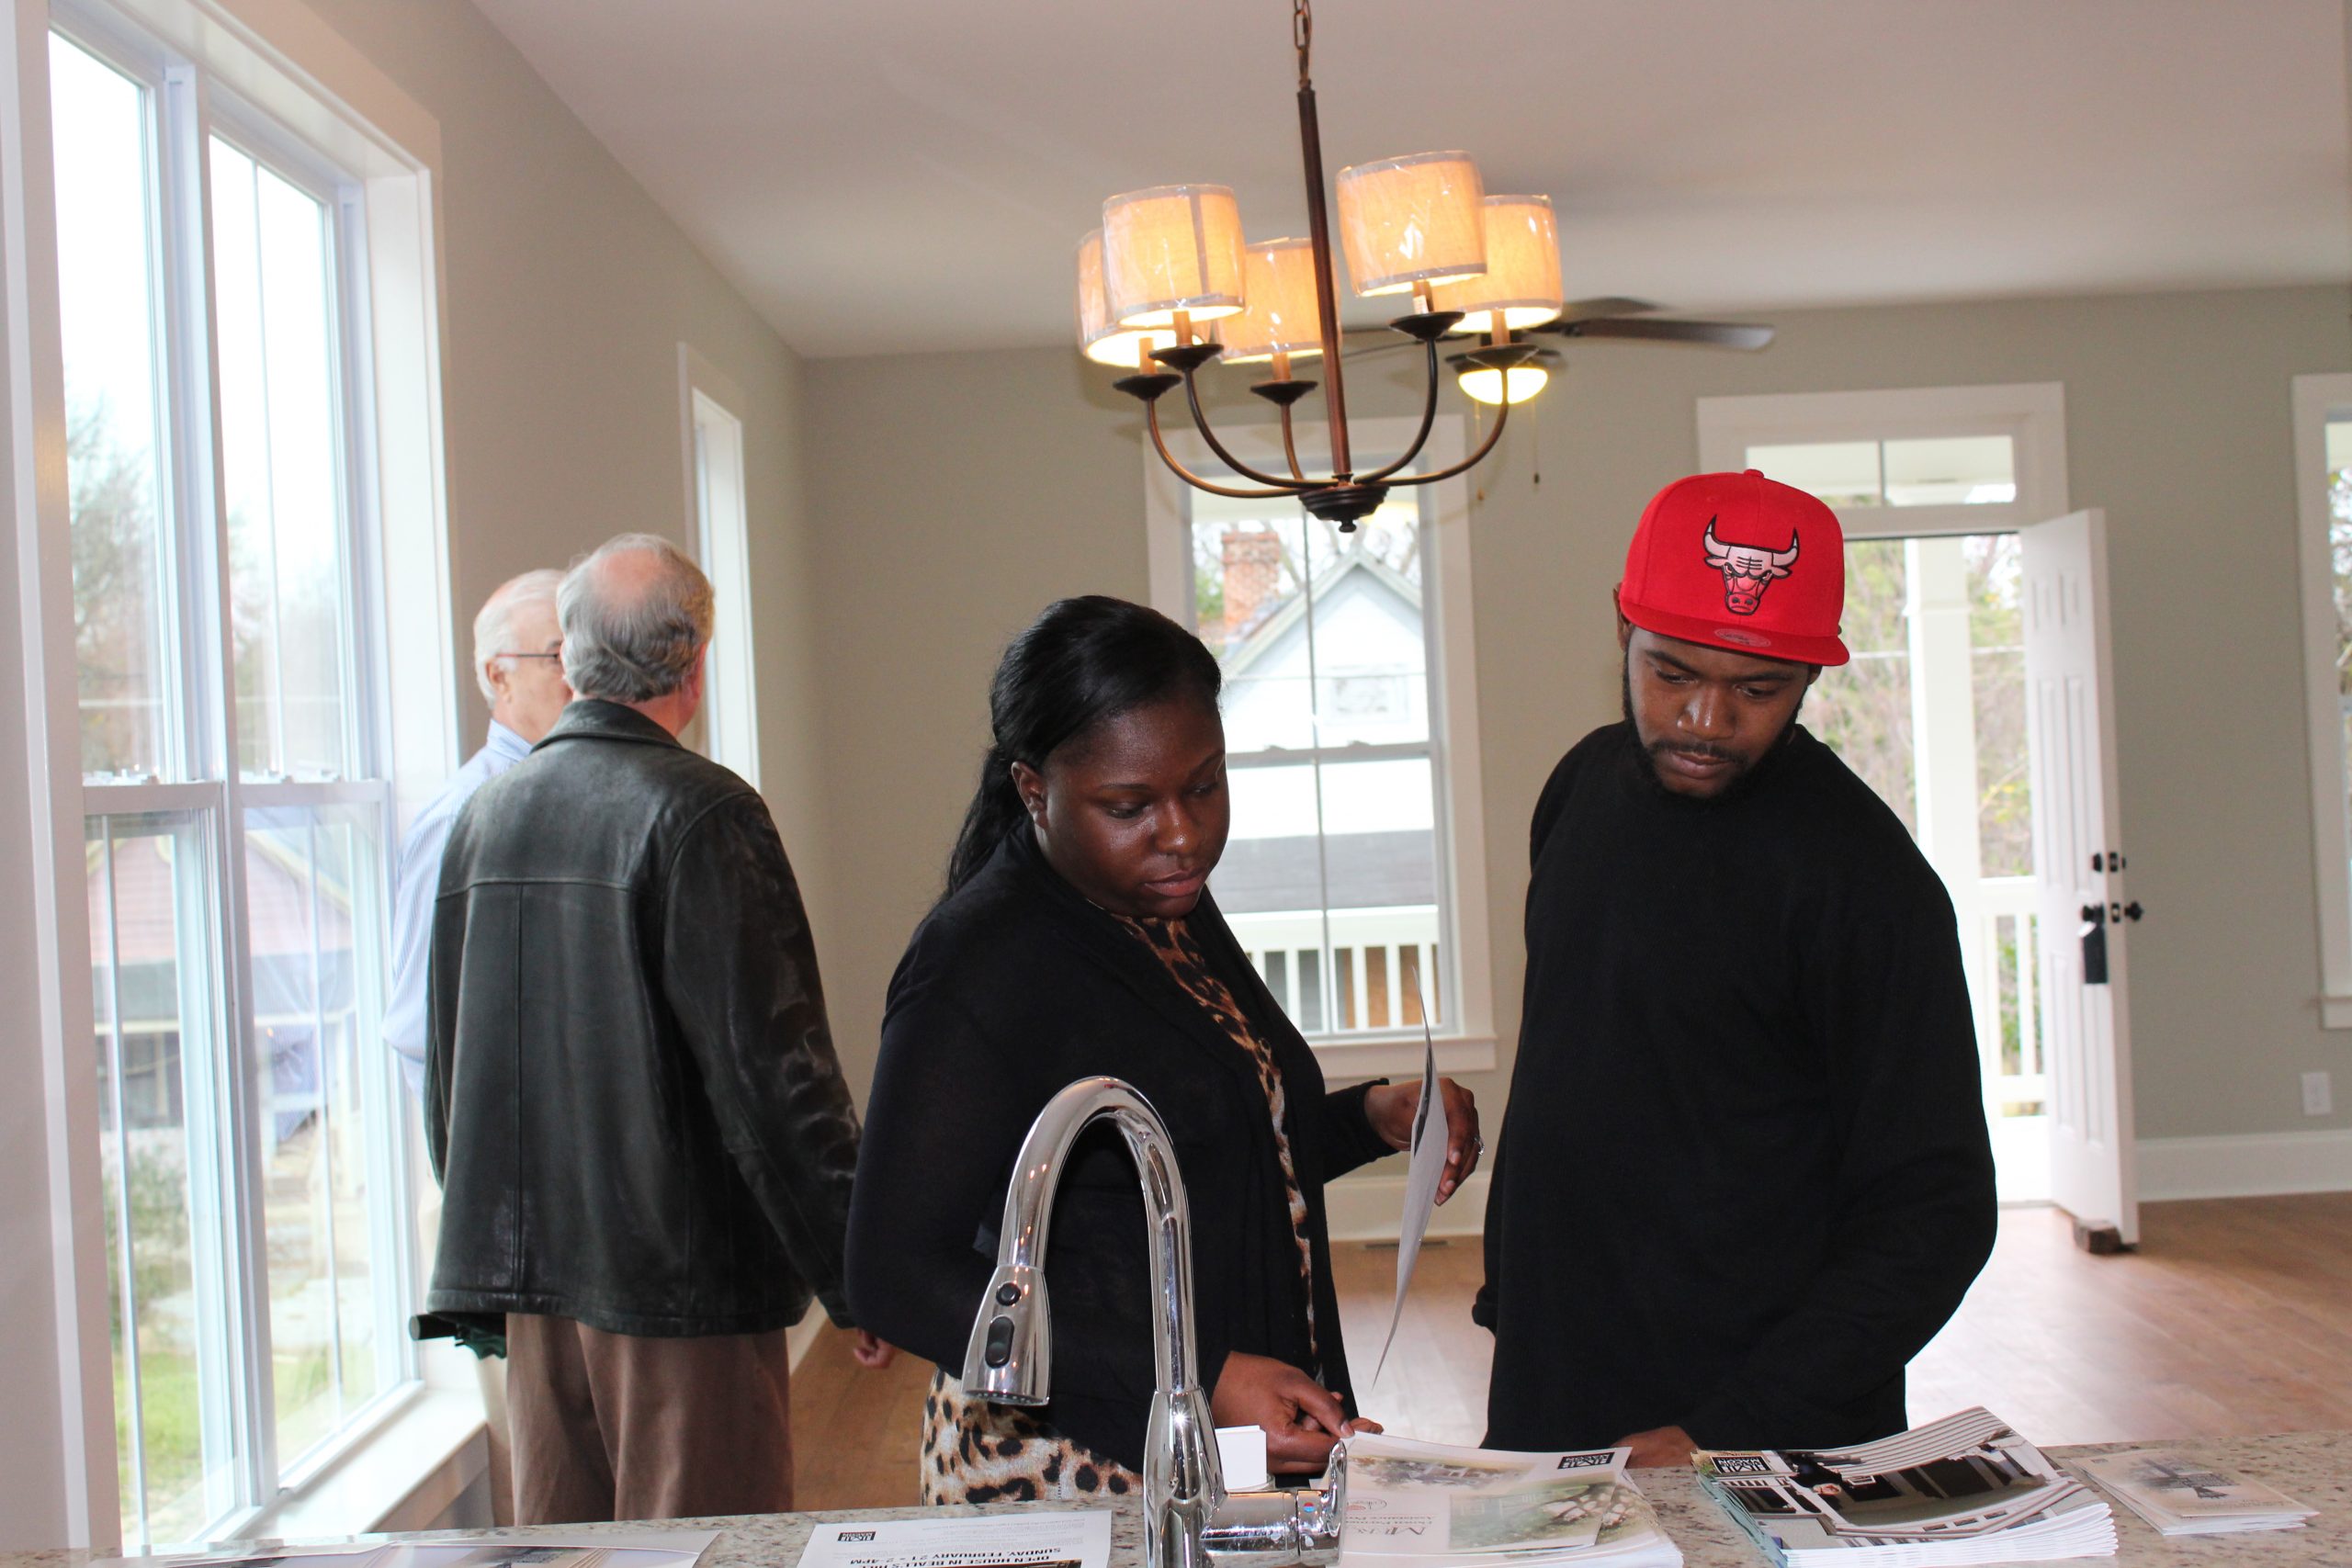 Prospective homebuyers review the benefits of buying a house from Historic Macon. (Photo Credit: Historic Macon)